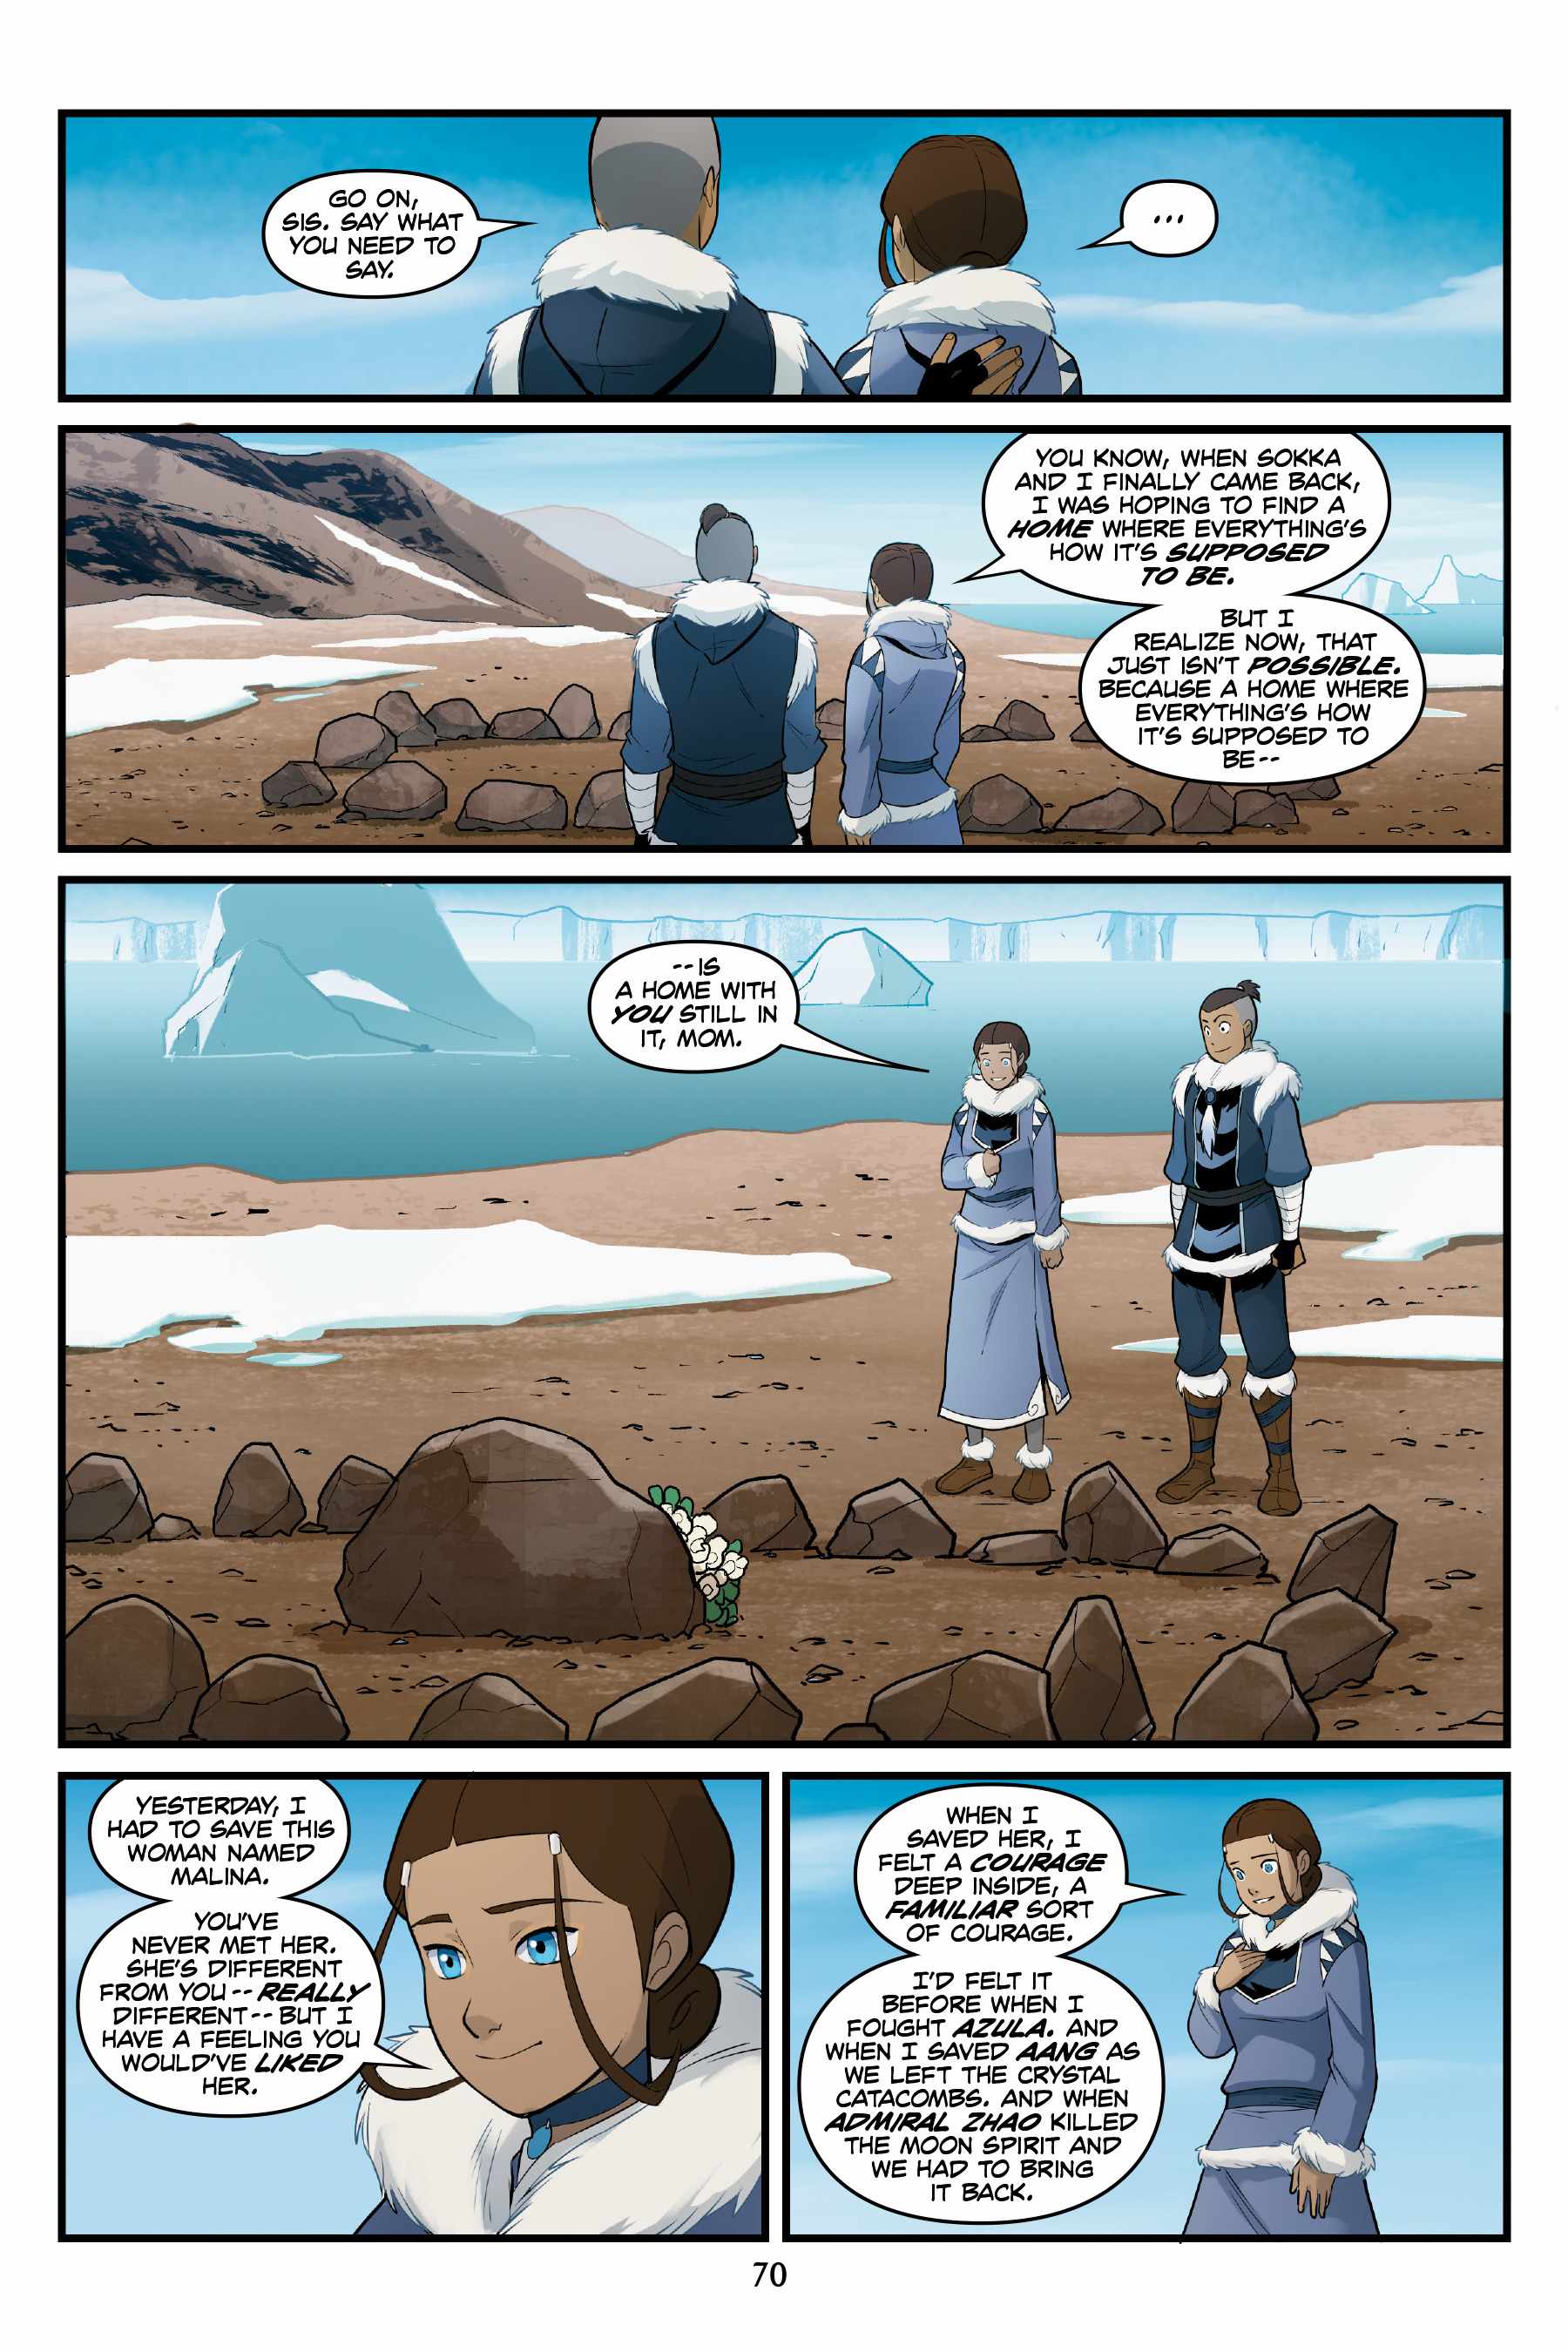 Read Comics Online Free - Avatar The Last Airbender Comic Book Issue #015 -  Page 69